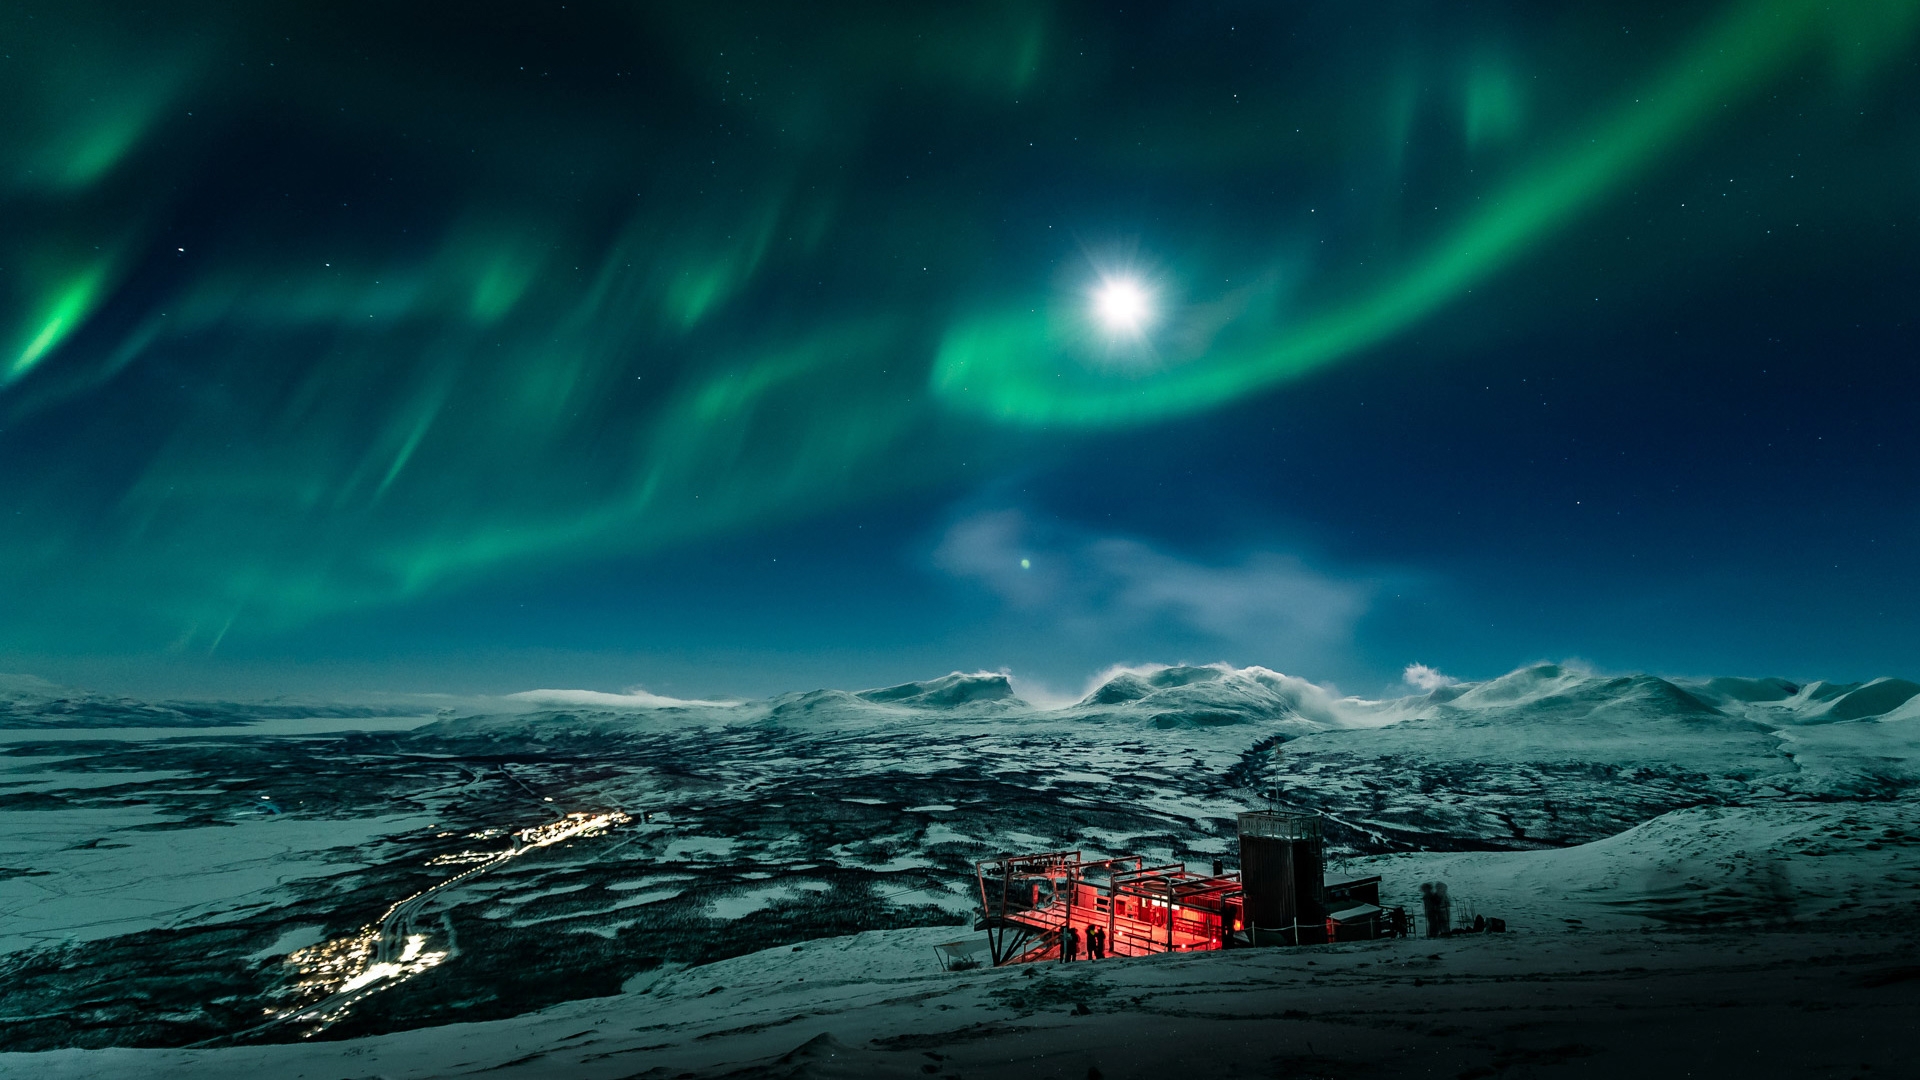 Aurora Viewing and Photography